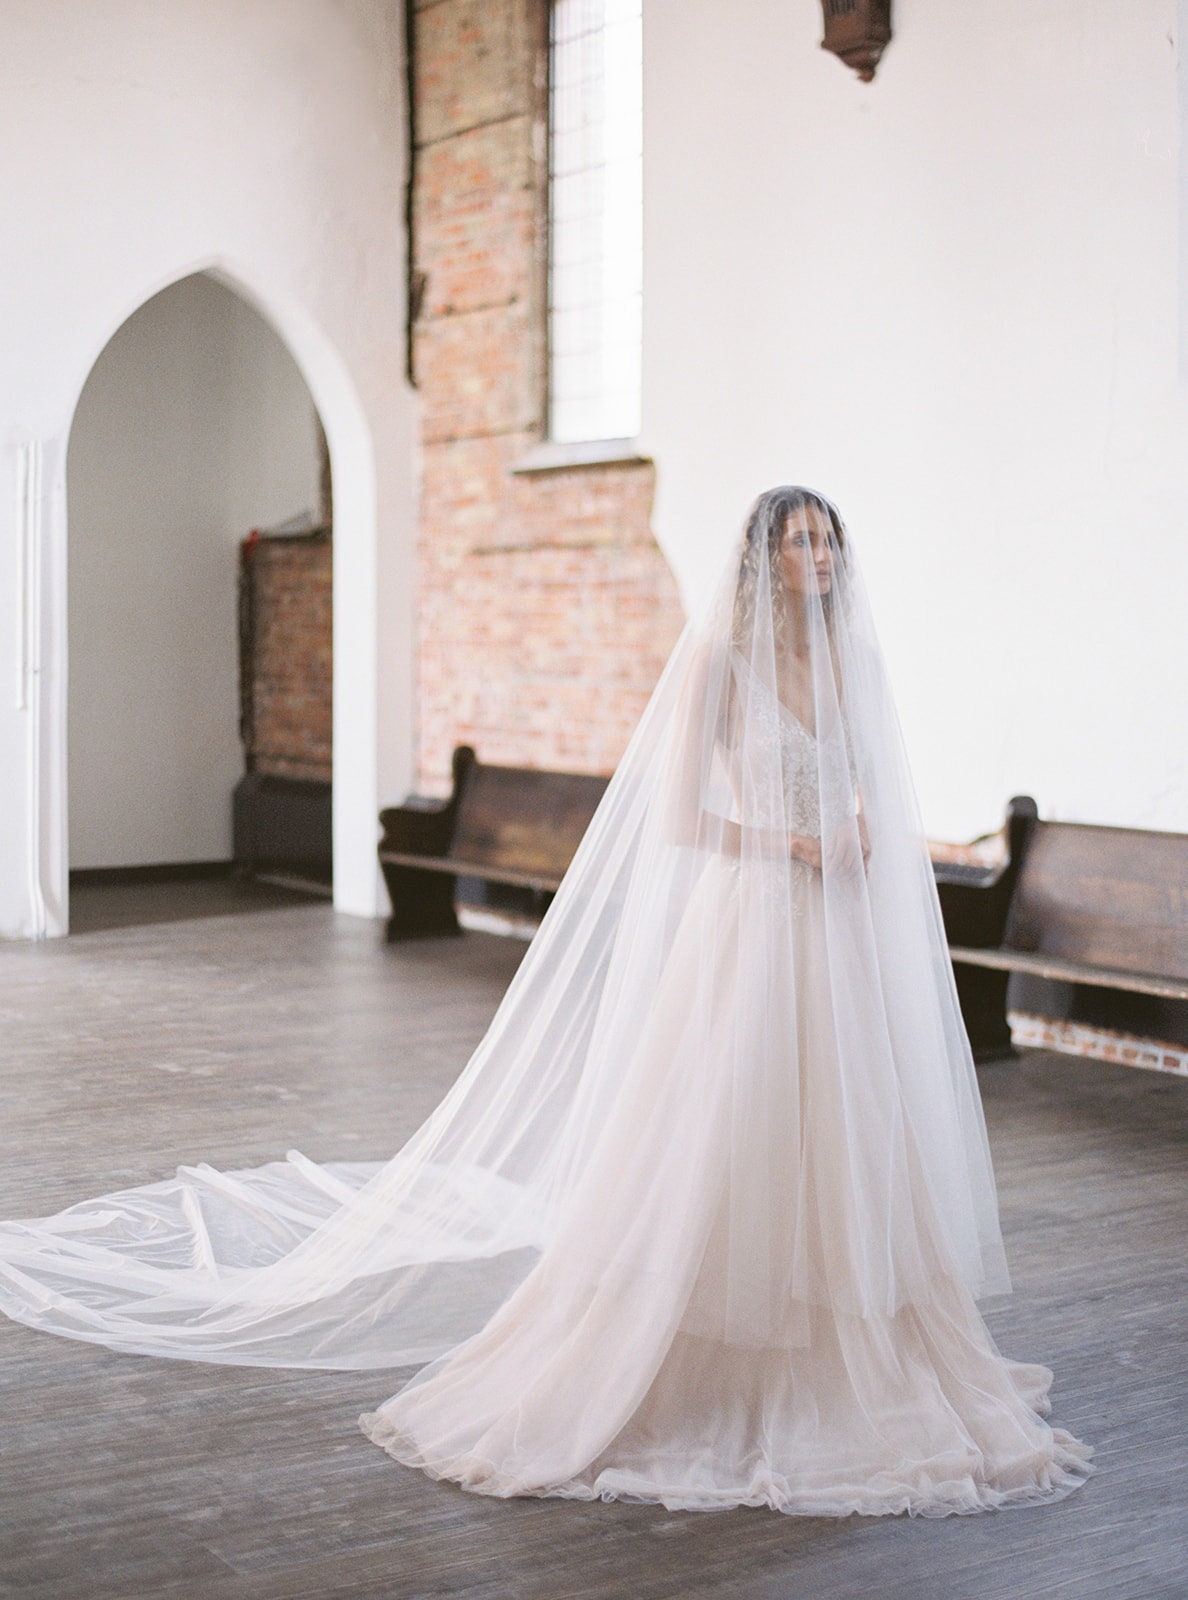 NoonOnTheMoon Cathedral Veil with Blusher, Wedding Veil with Blusher, Cathedral Drop Veil, Long Blusher Veil, Chapel Blusher Veil - Sophia